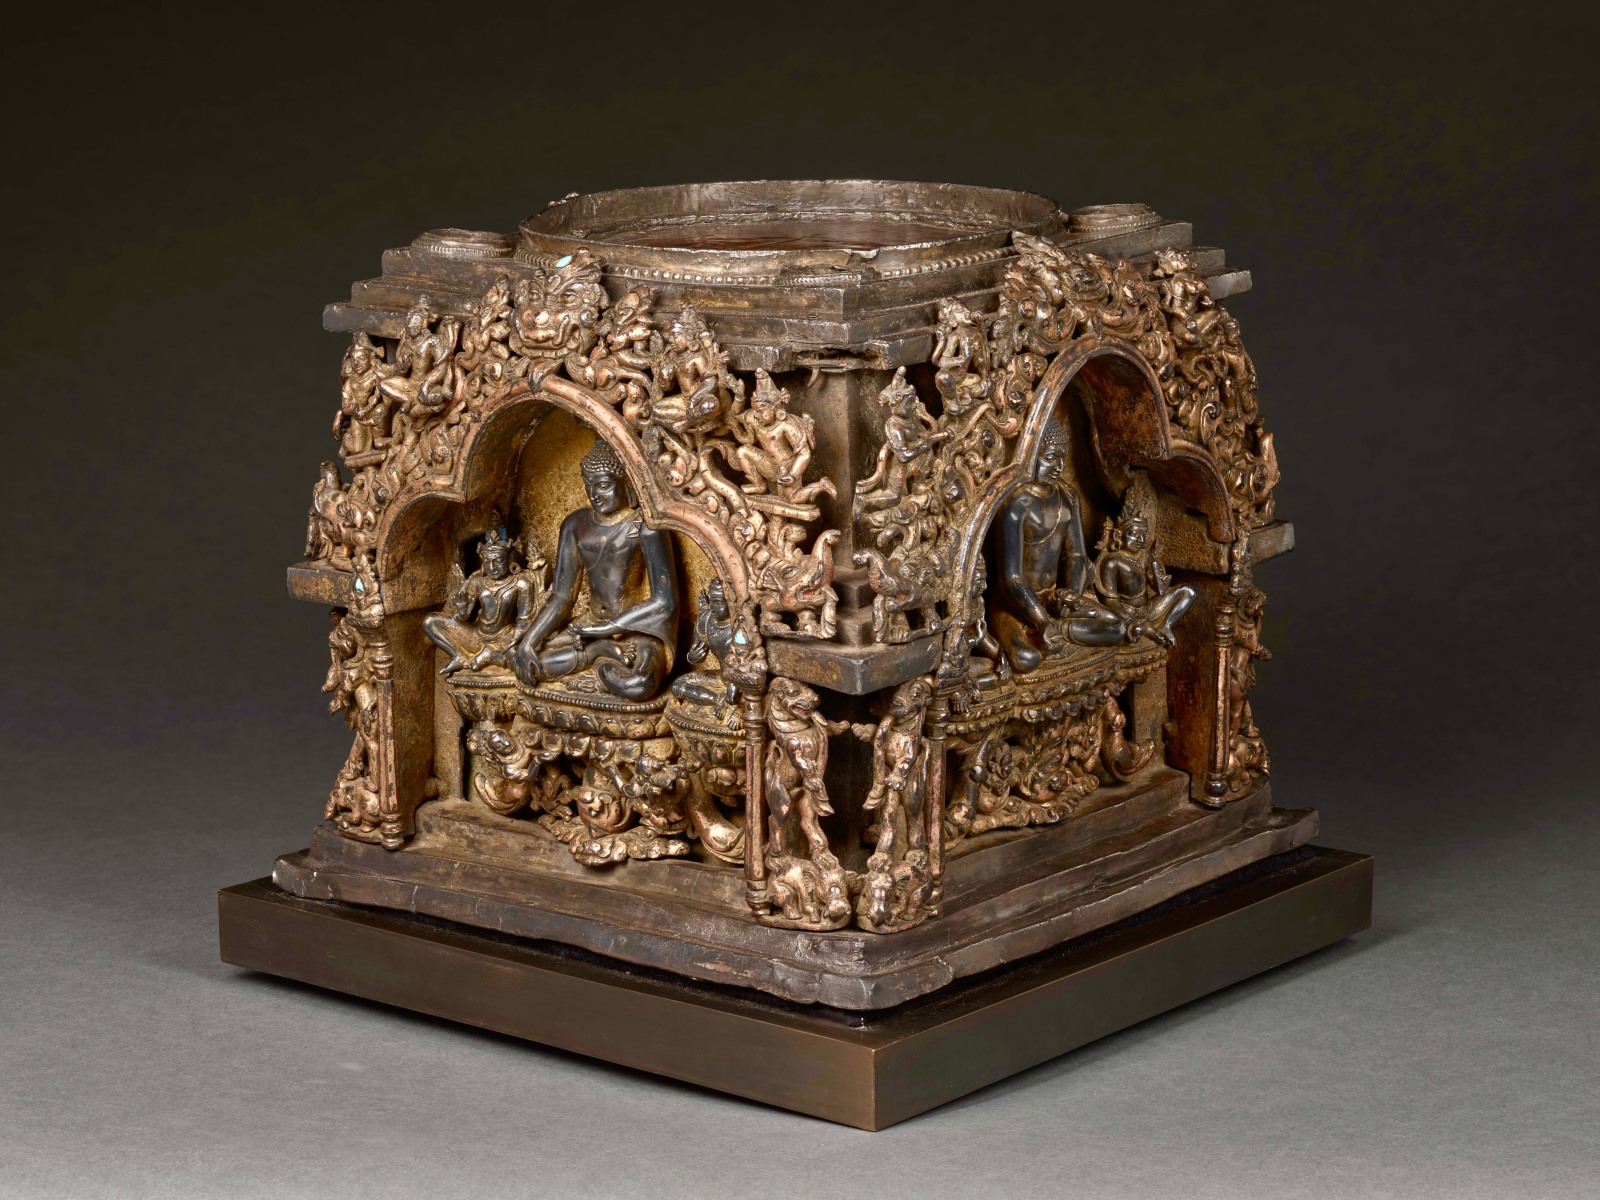 Same image of This plinth from an important eastern Indian stupa is assembled from four separately-cast gilt-copper arches (torana) with crouching elephants, rampant leogryphs, and jewel-topped pillars supporting trilobate spans, makara at either end of the crossbars, bodhisattvas and celestial figures above, and with kirtimukha at the apex.  